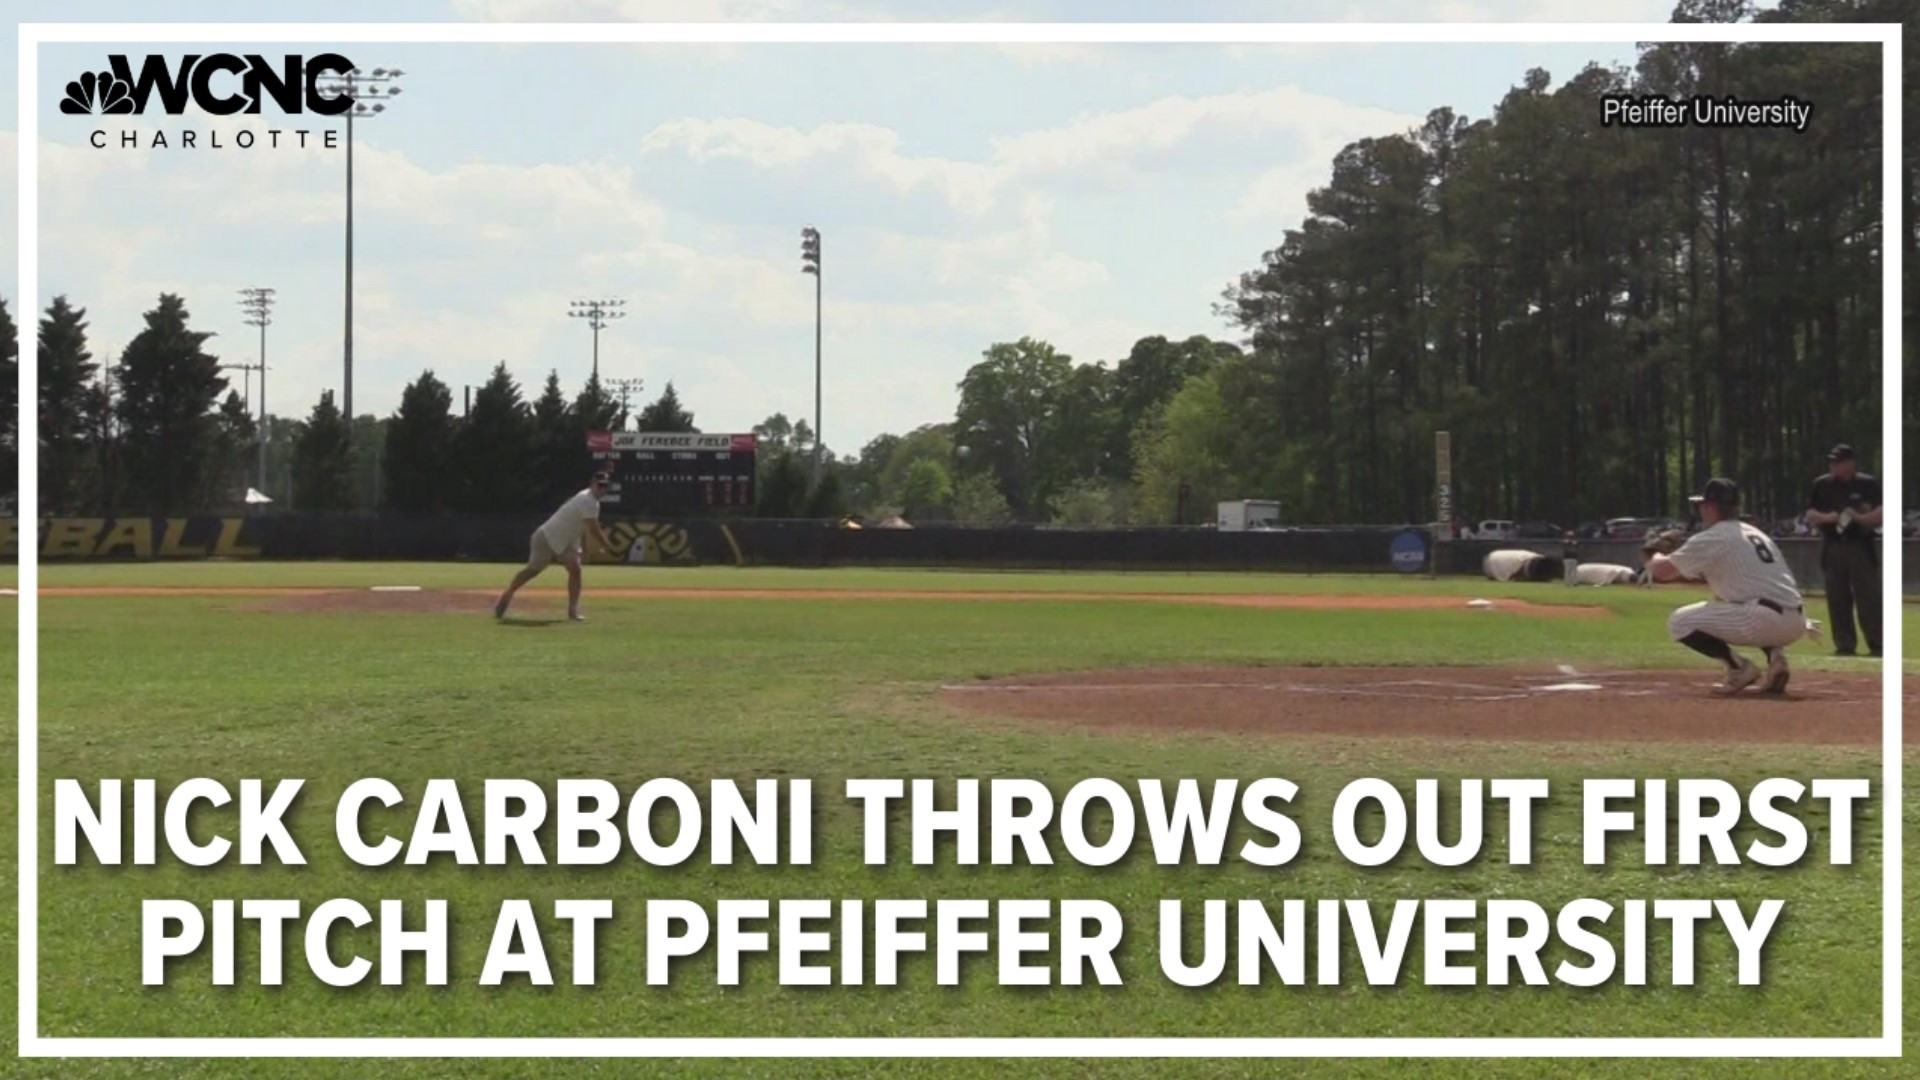 Pfeiffer University was having a baseball reunion and remembering former coach Joe Ferebee, who is the winningest amateur baseball coach in state history.